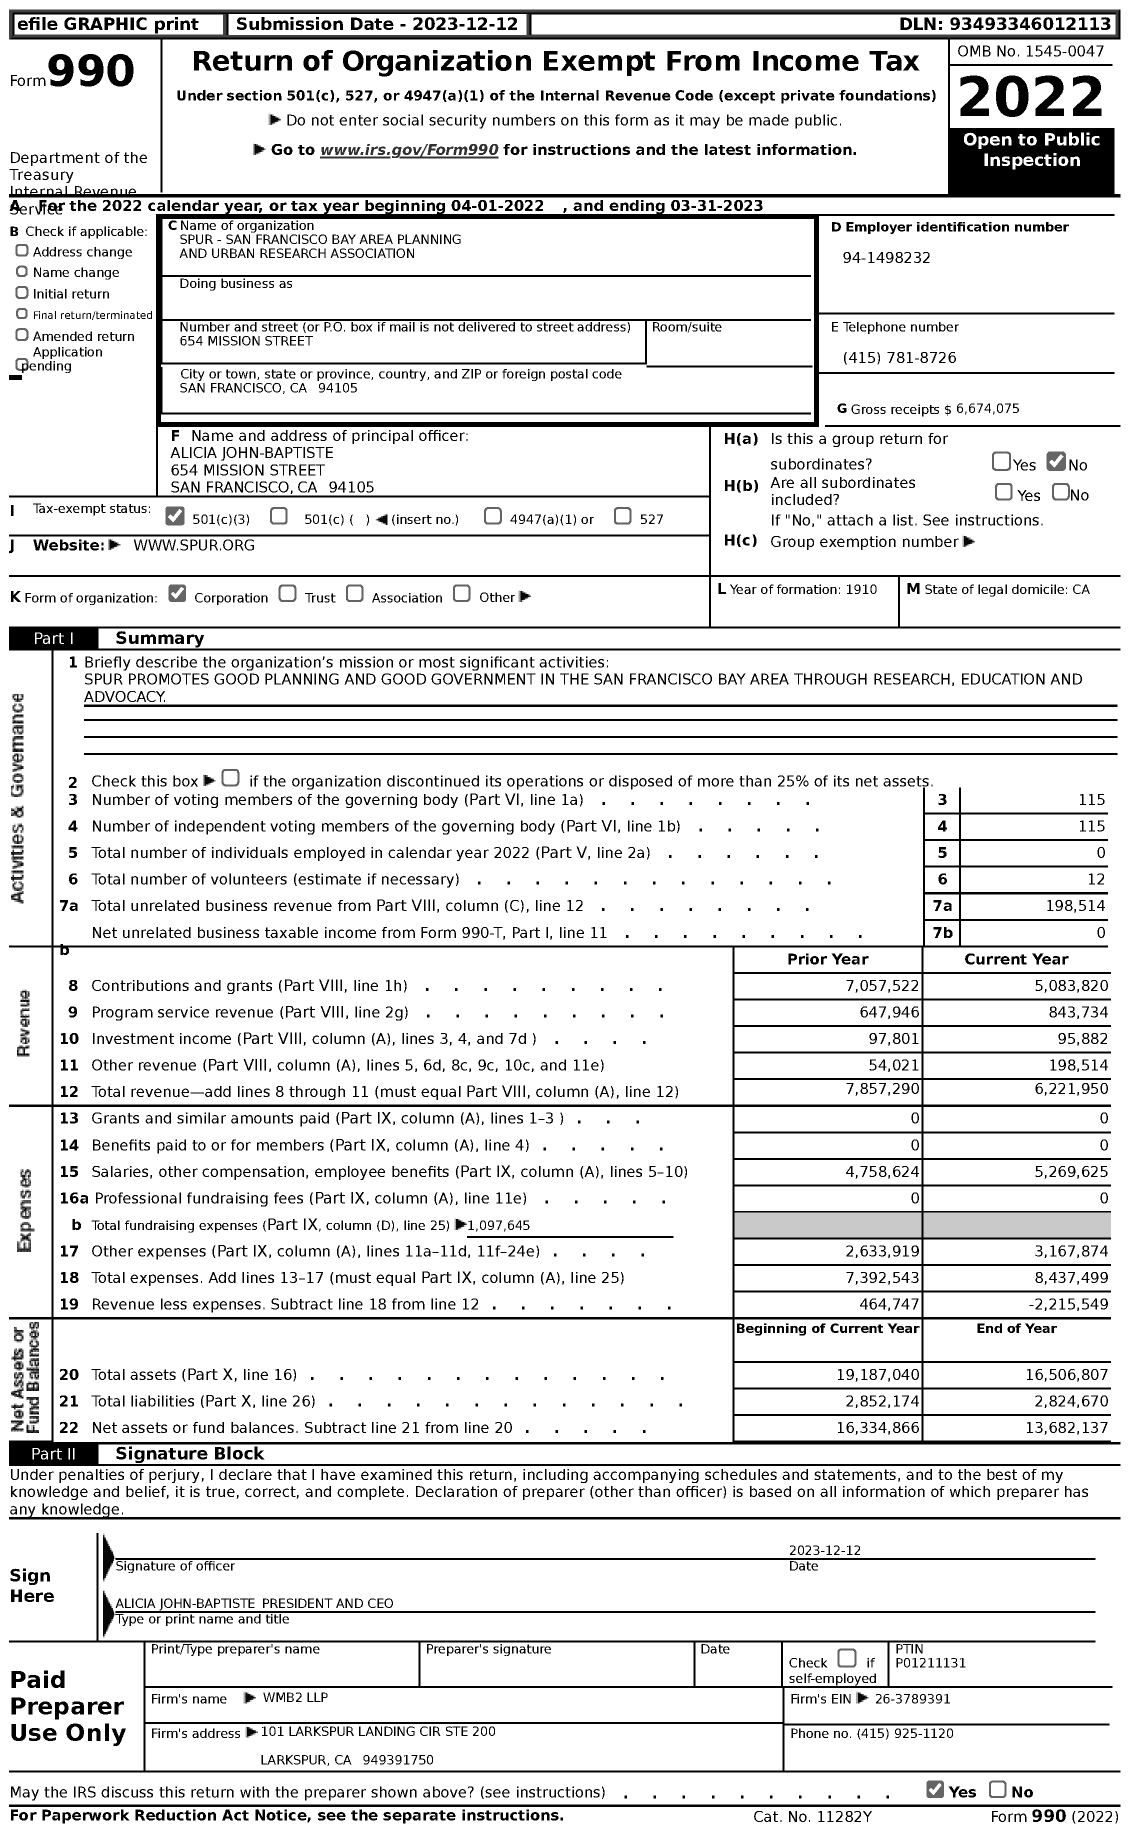 Image of first page of 2022 Form 990 for San Francisco Bay Are Planning and Urban Research Association (SPUR)